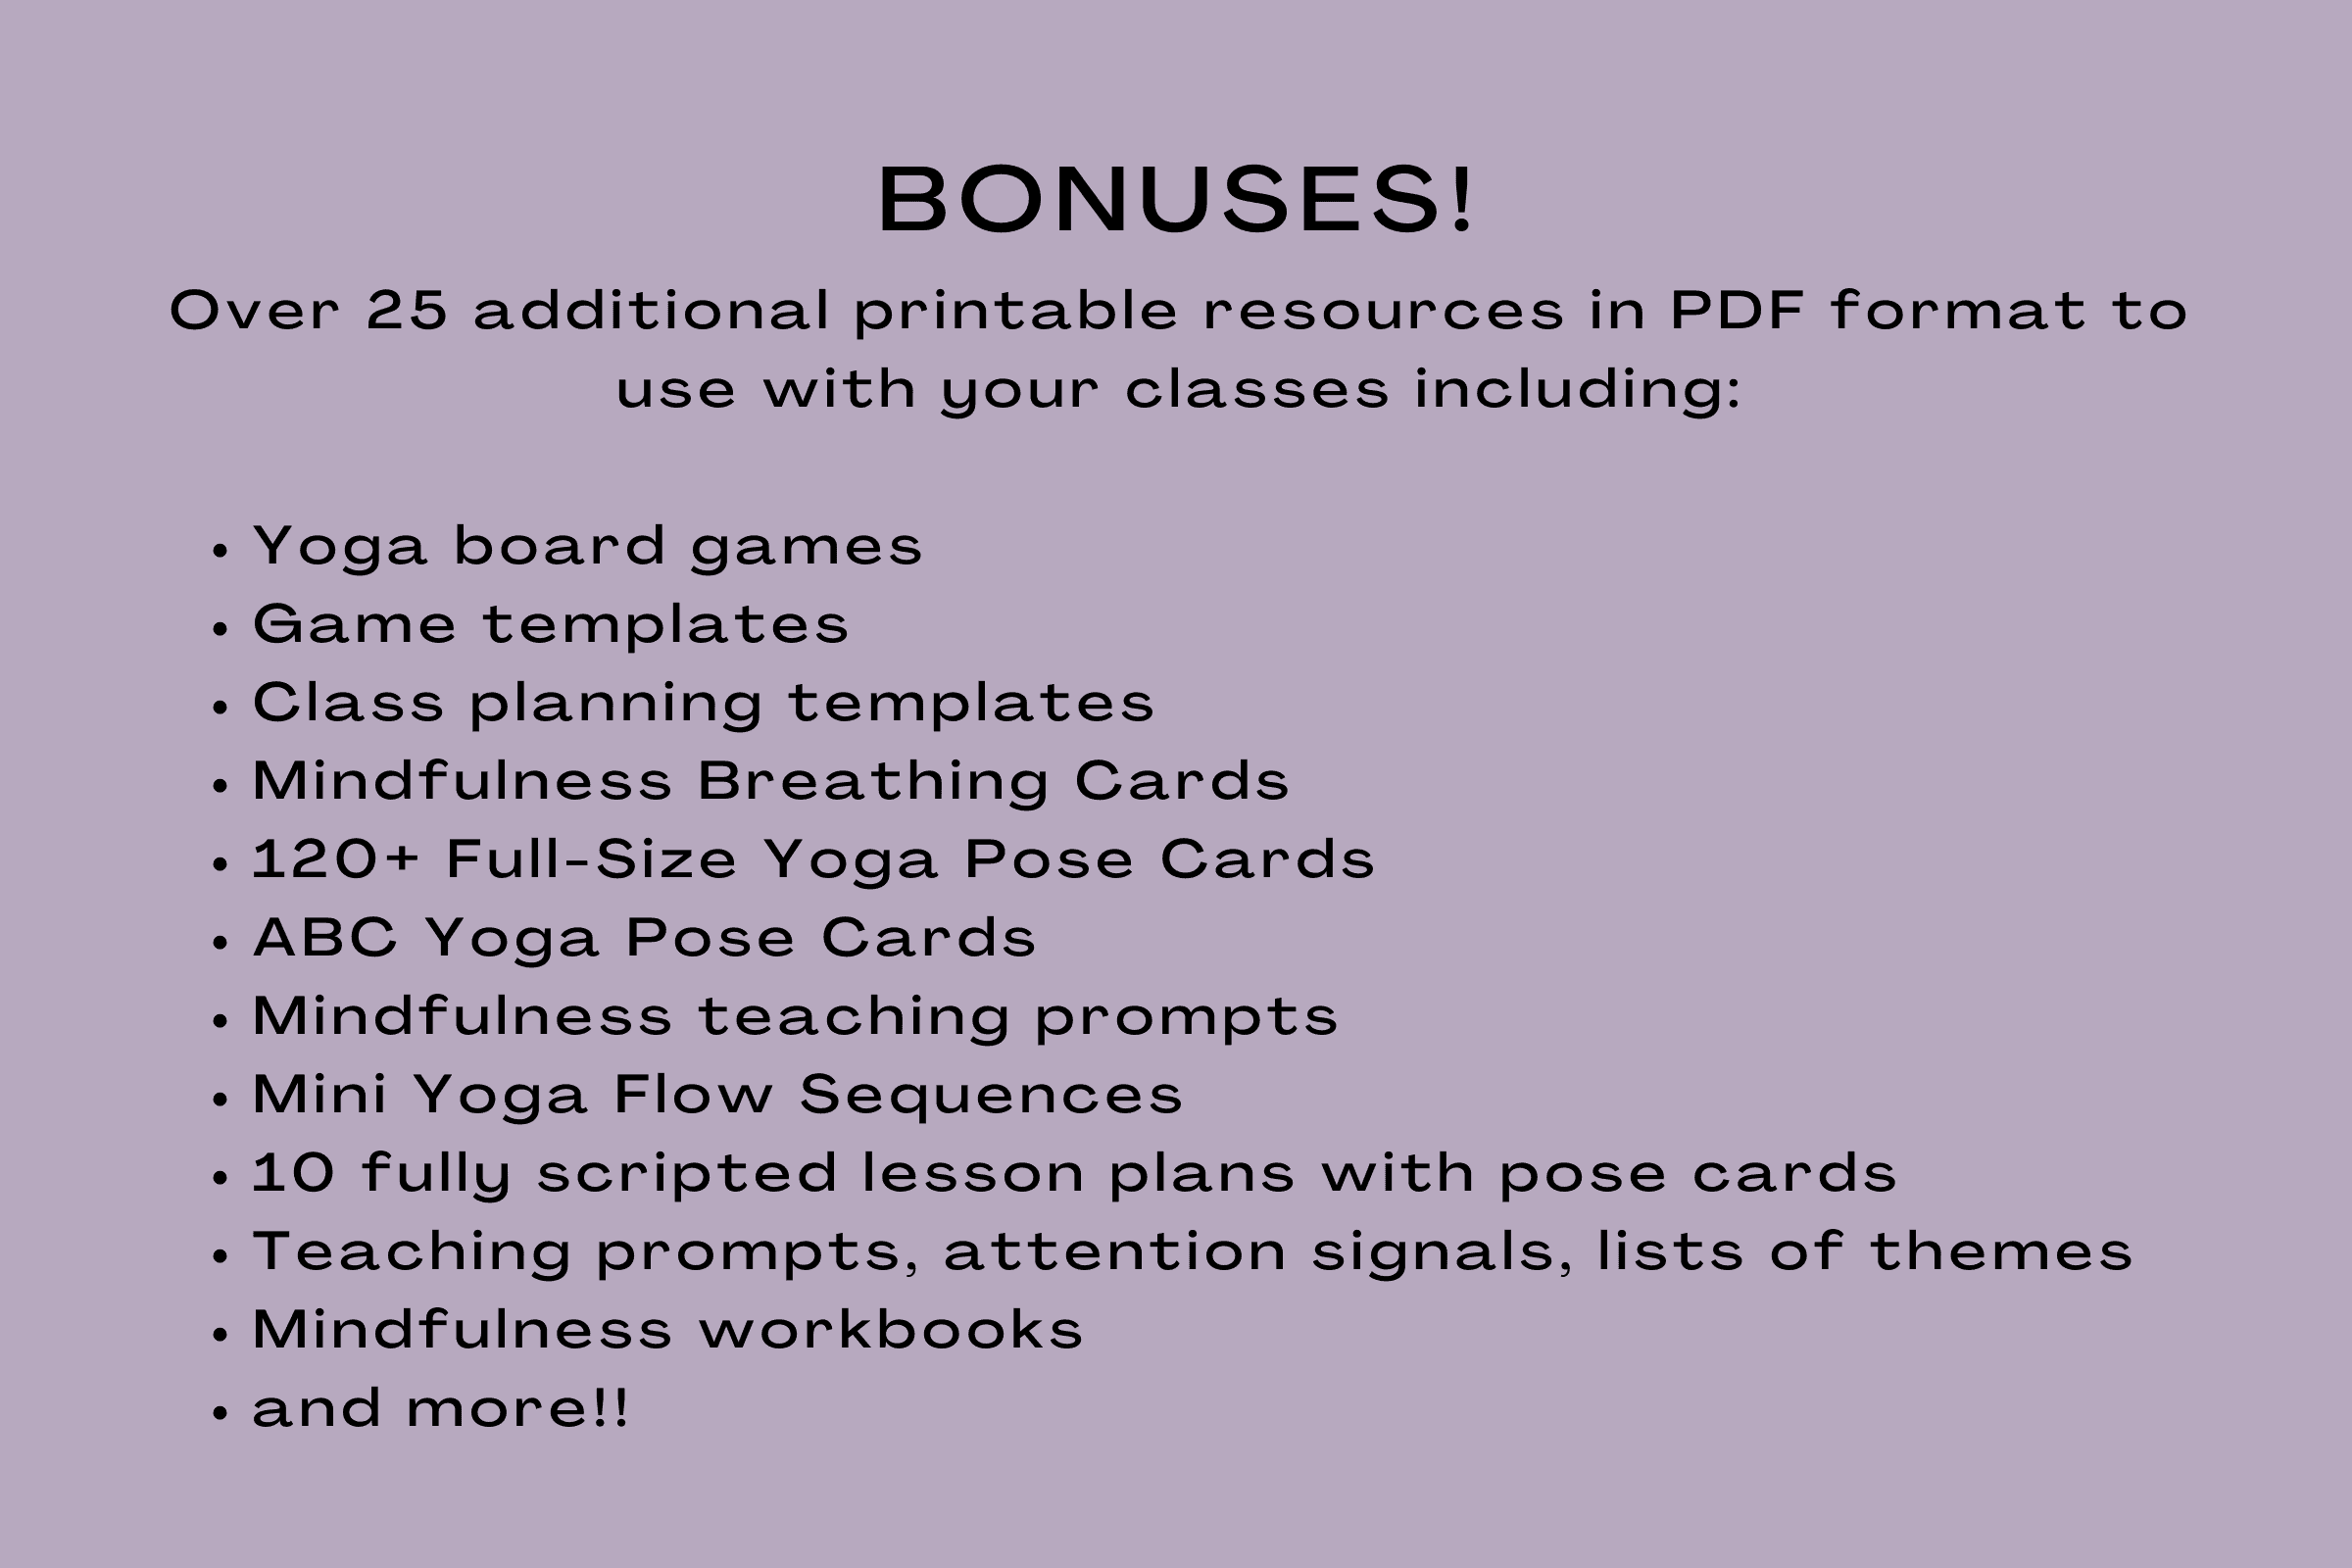 Over 25 additional printable resources in PDF format to use with your classes including:

Yoga board games
Game templates
Class planning templates
Mindfulness Breathing Cards
120+ Full-Size Yoga Pose Cards
ABC Yoga Pose Cards
Mindfulness teaching prompts
Mini Yoga Flow Sequences
10 fully scripted lesson plans with pose cards
Teaching prompts, attention signals, lists of themes
Mindfulness workbooks
and more!!